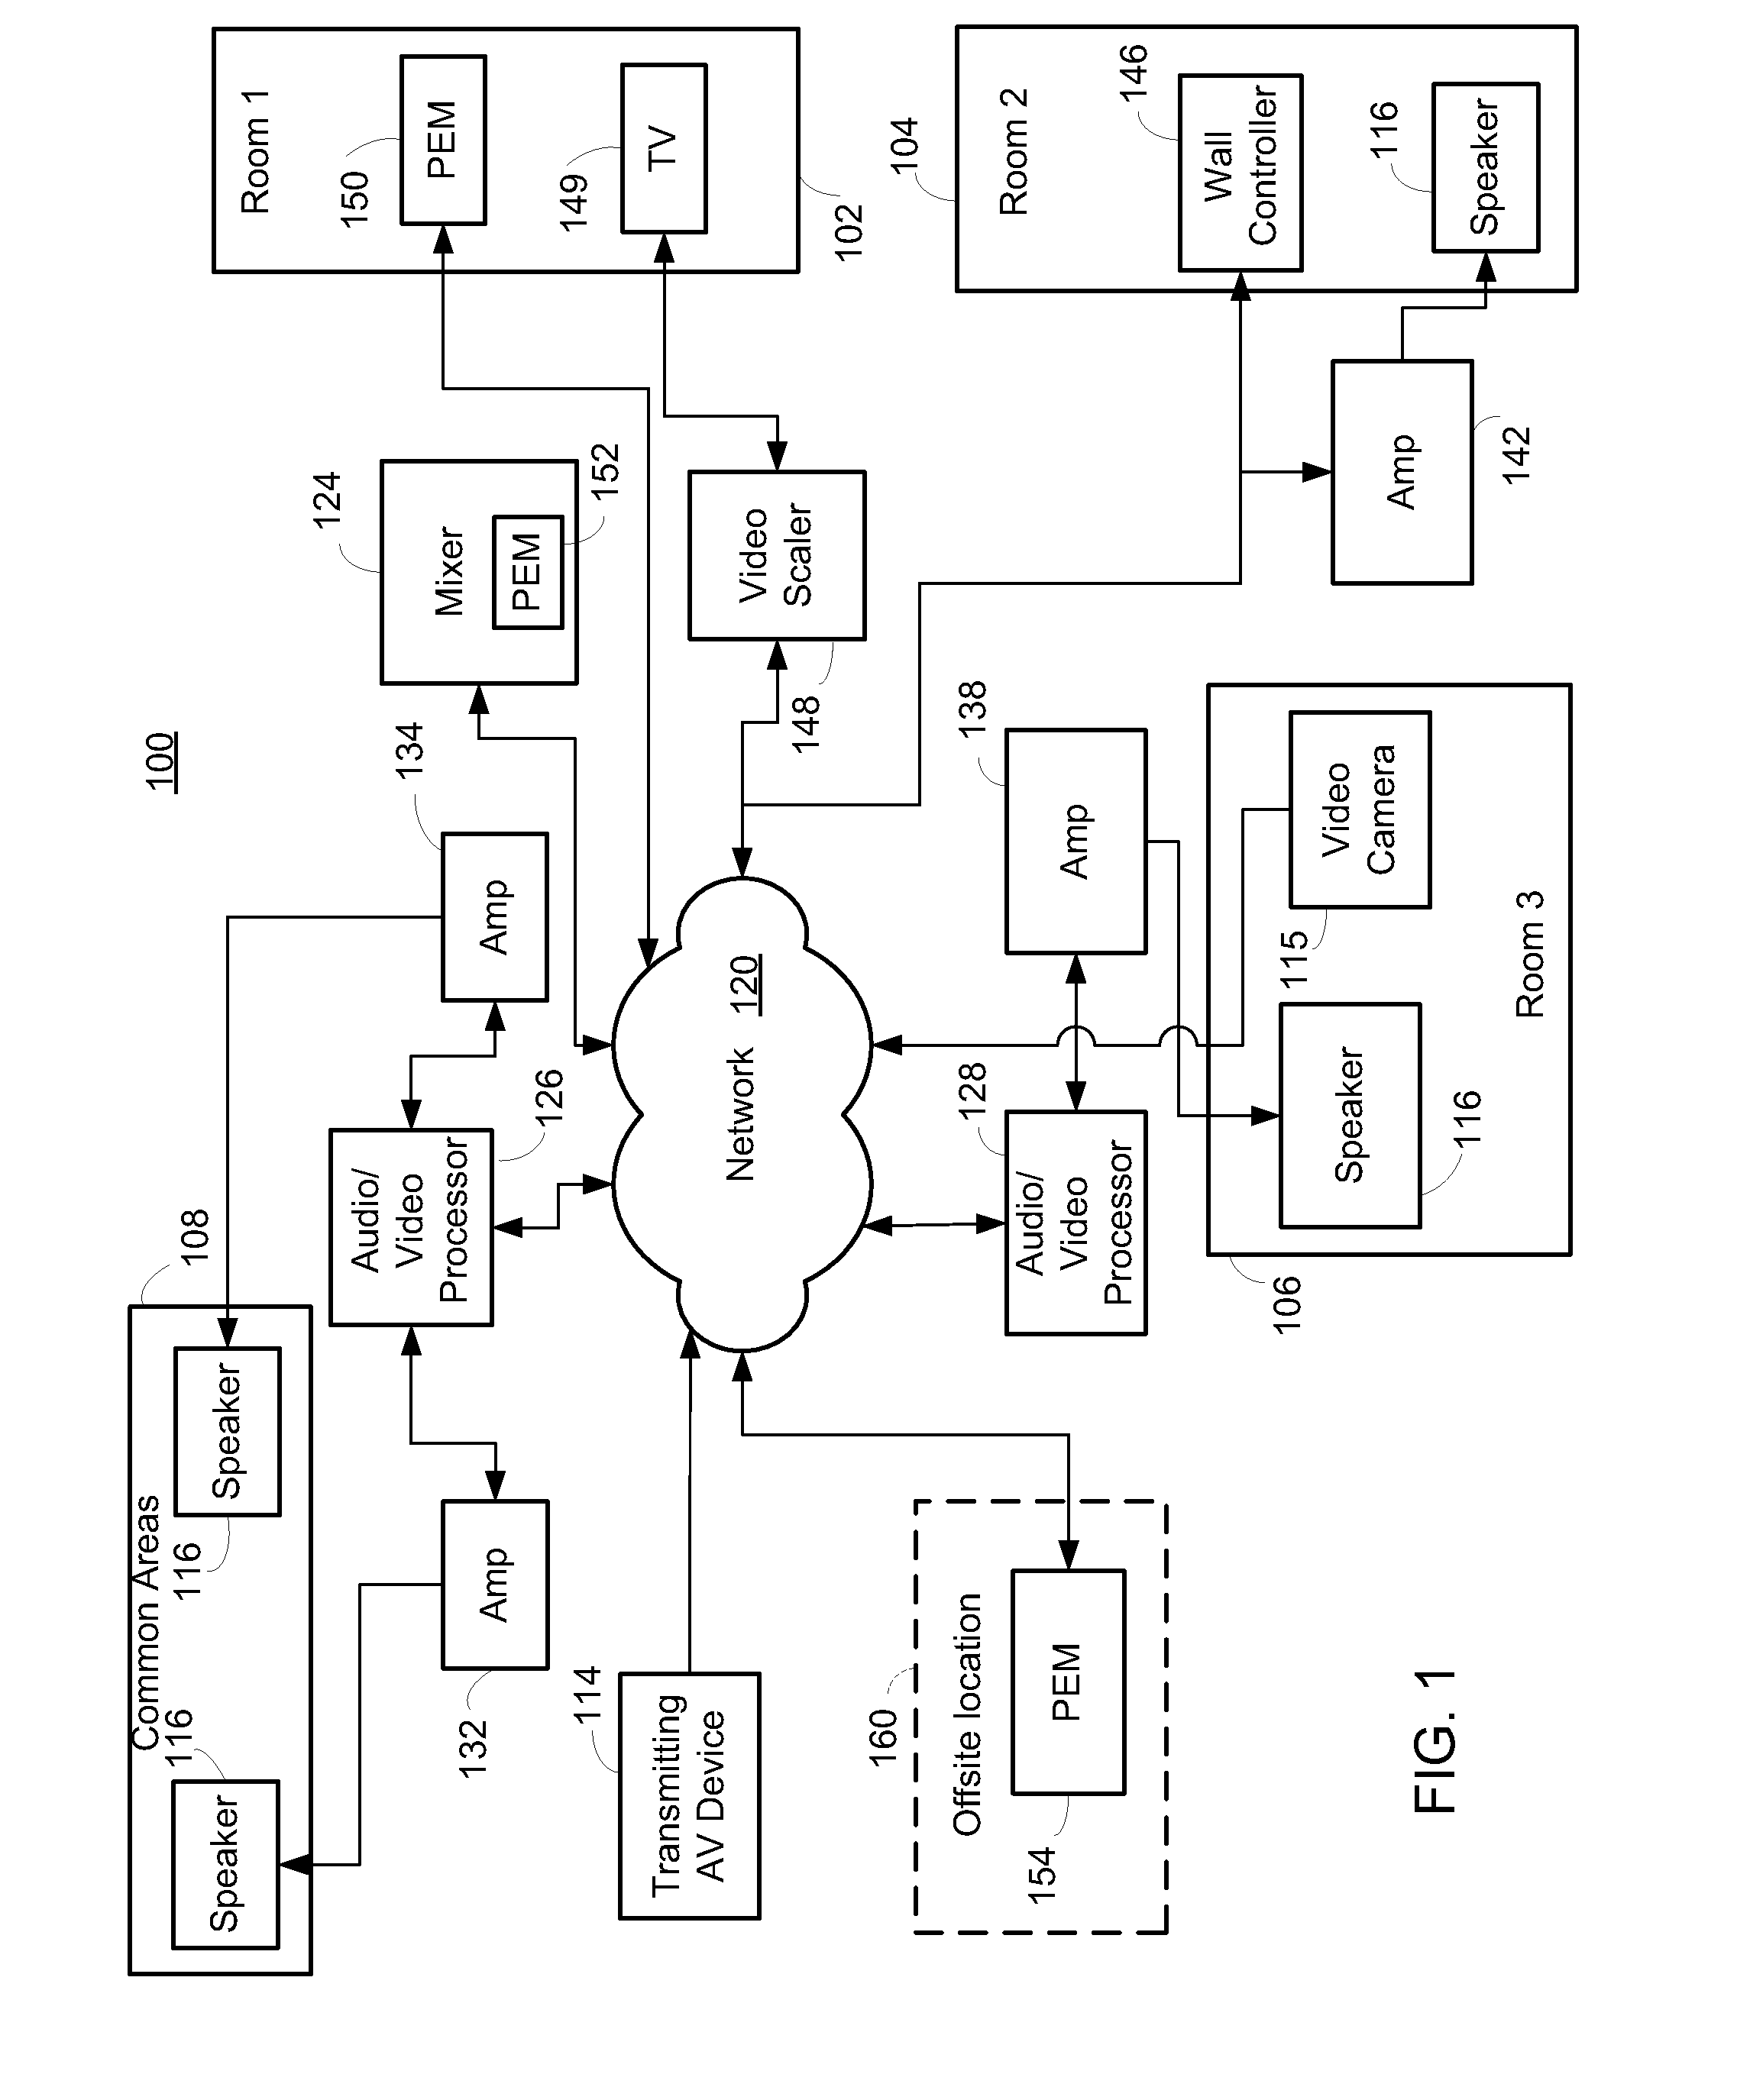 System for automated generation of audio/video control interfaces